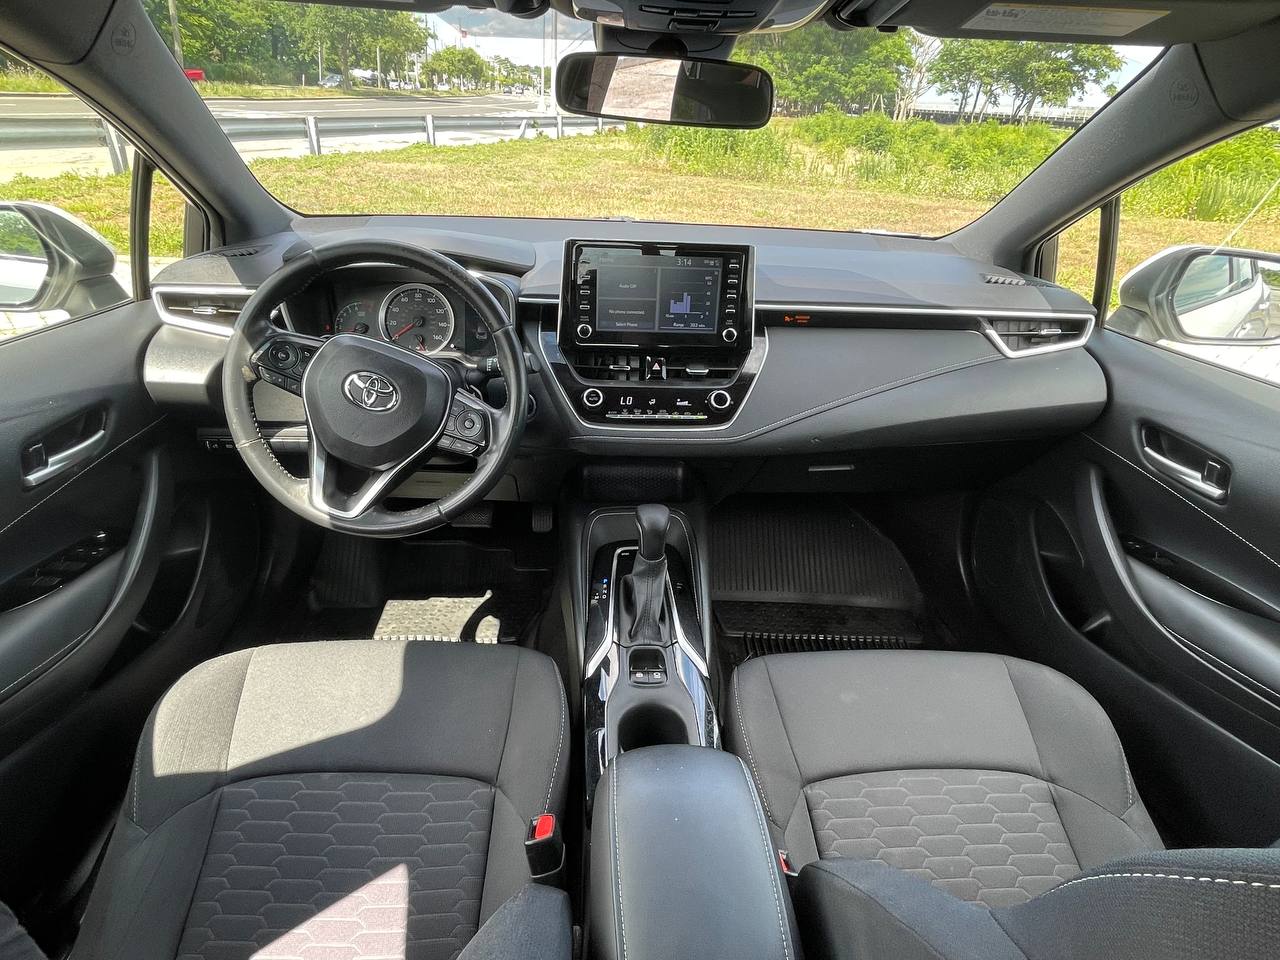 Used - Toyota Corolla SE Hatchback for sale in Staten Island NY